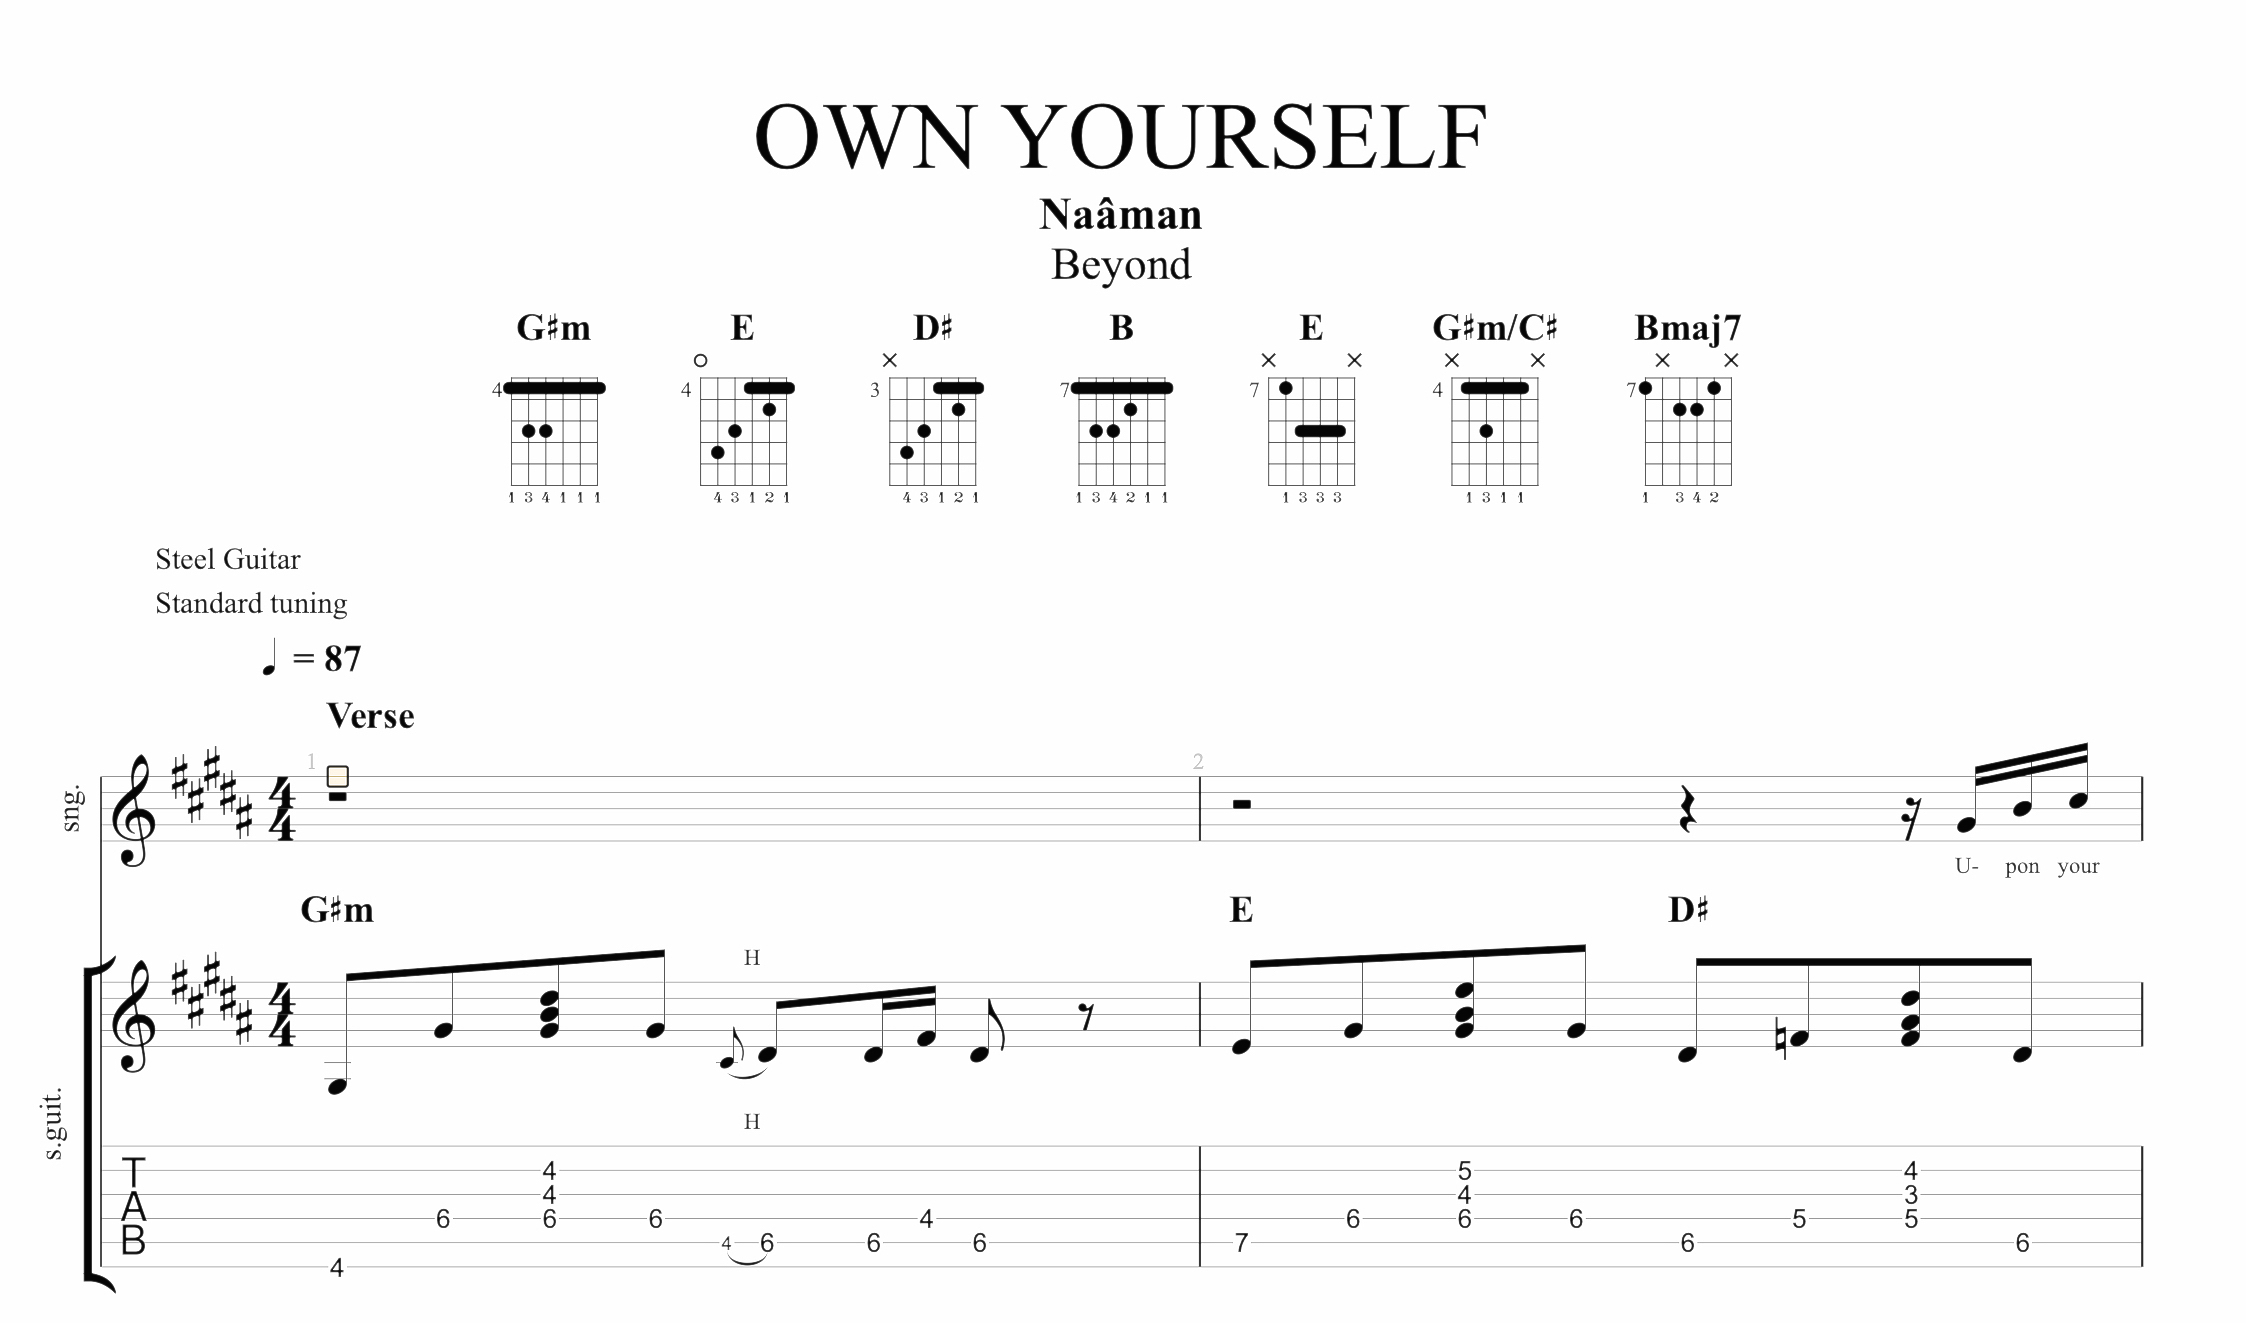 Your Great Name Chords Tuto 10 Tips To Give A Professional Look To Your Scores In Guitar